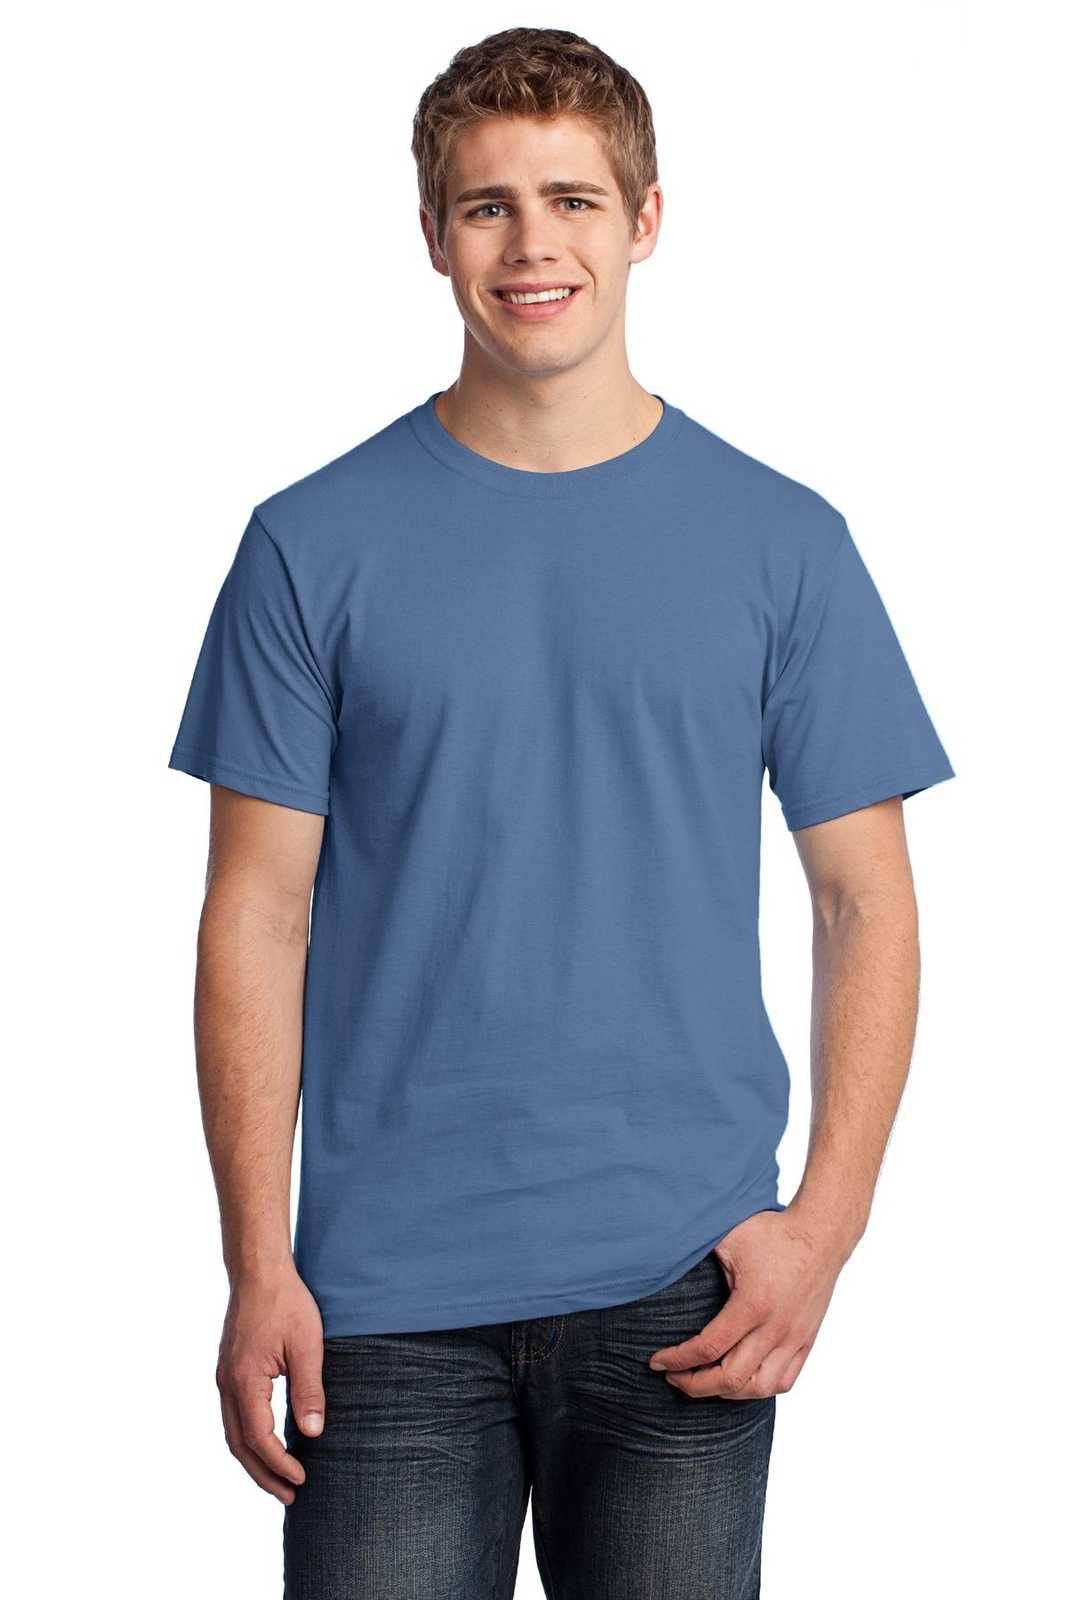 Fruit of the Loom 3930 HD Cotton 100% Cotton T-Shirt - Columbia Blue - HIT a Double